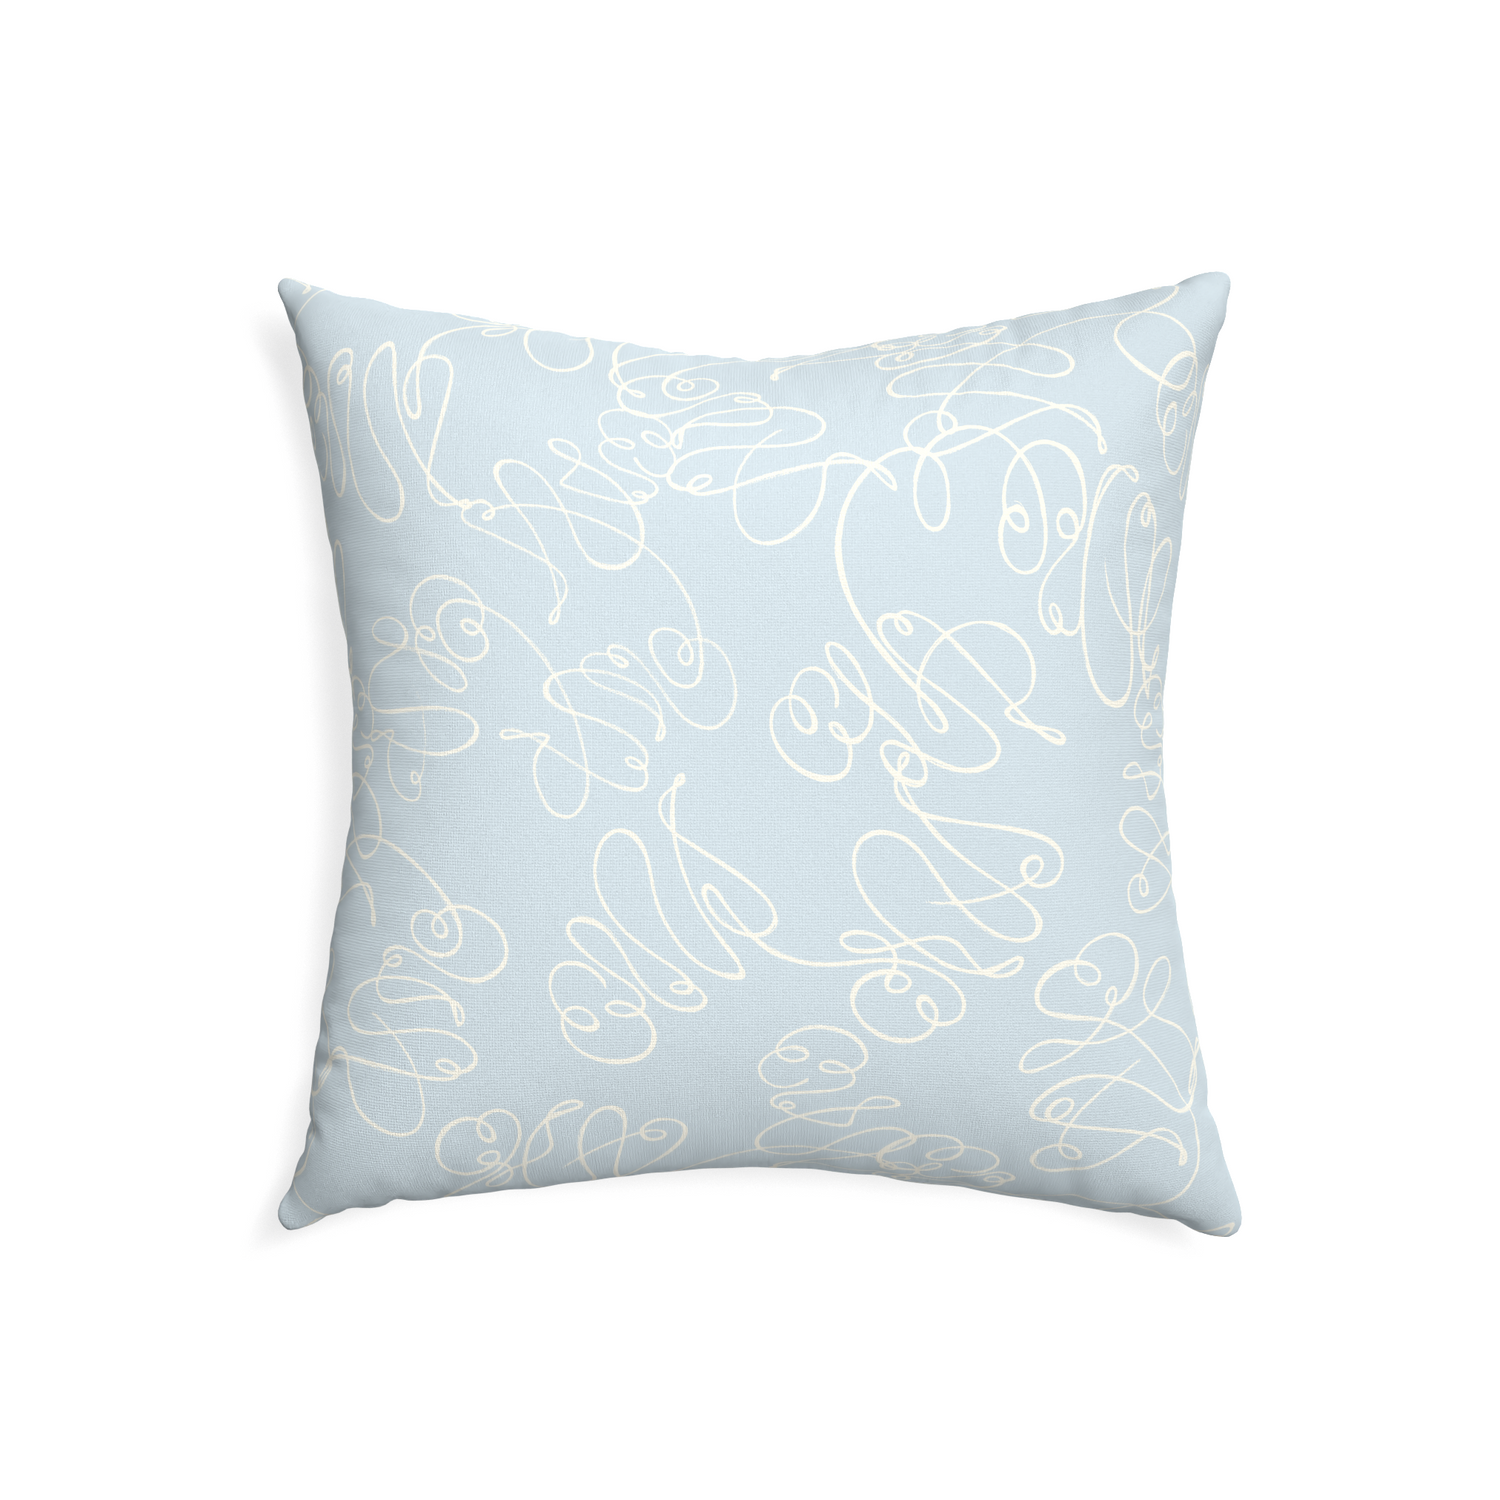 22-square mirabella custom powder blue abstractpillow with none on white background